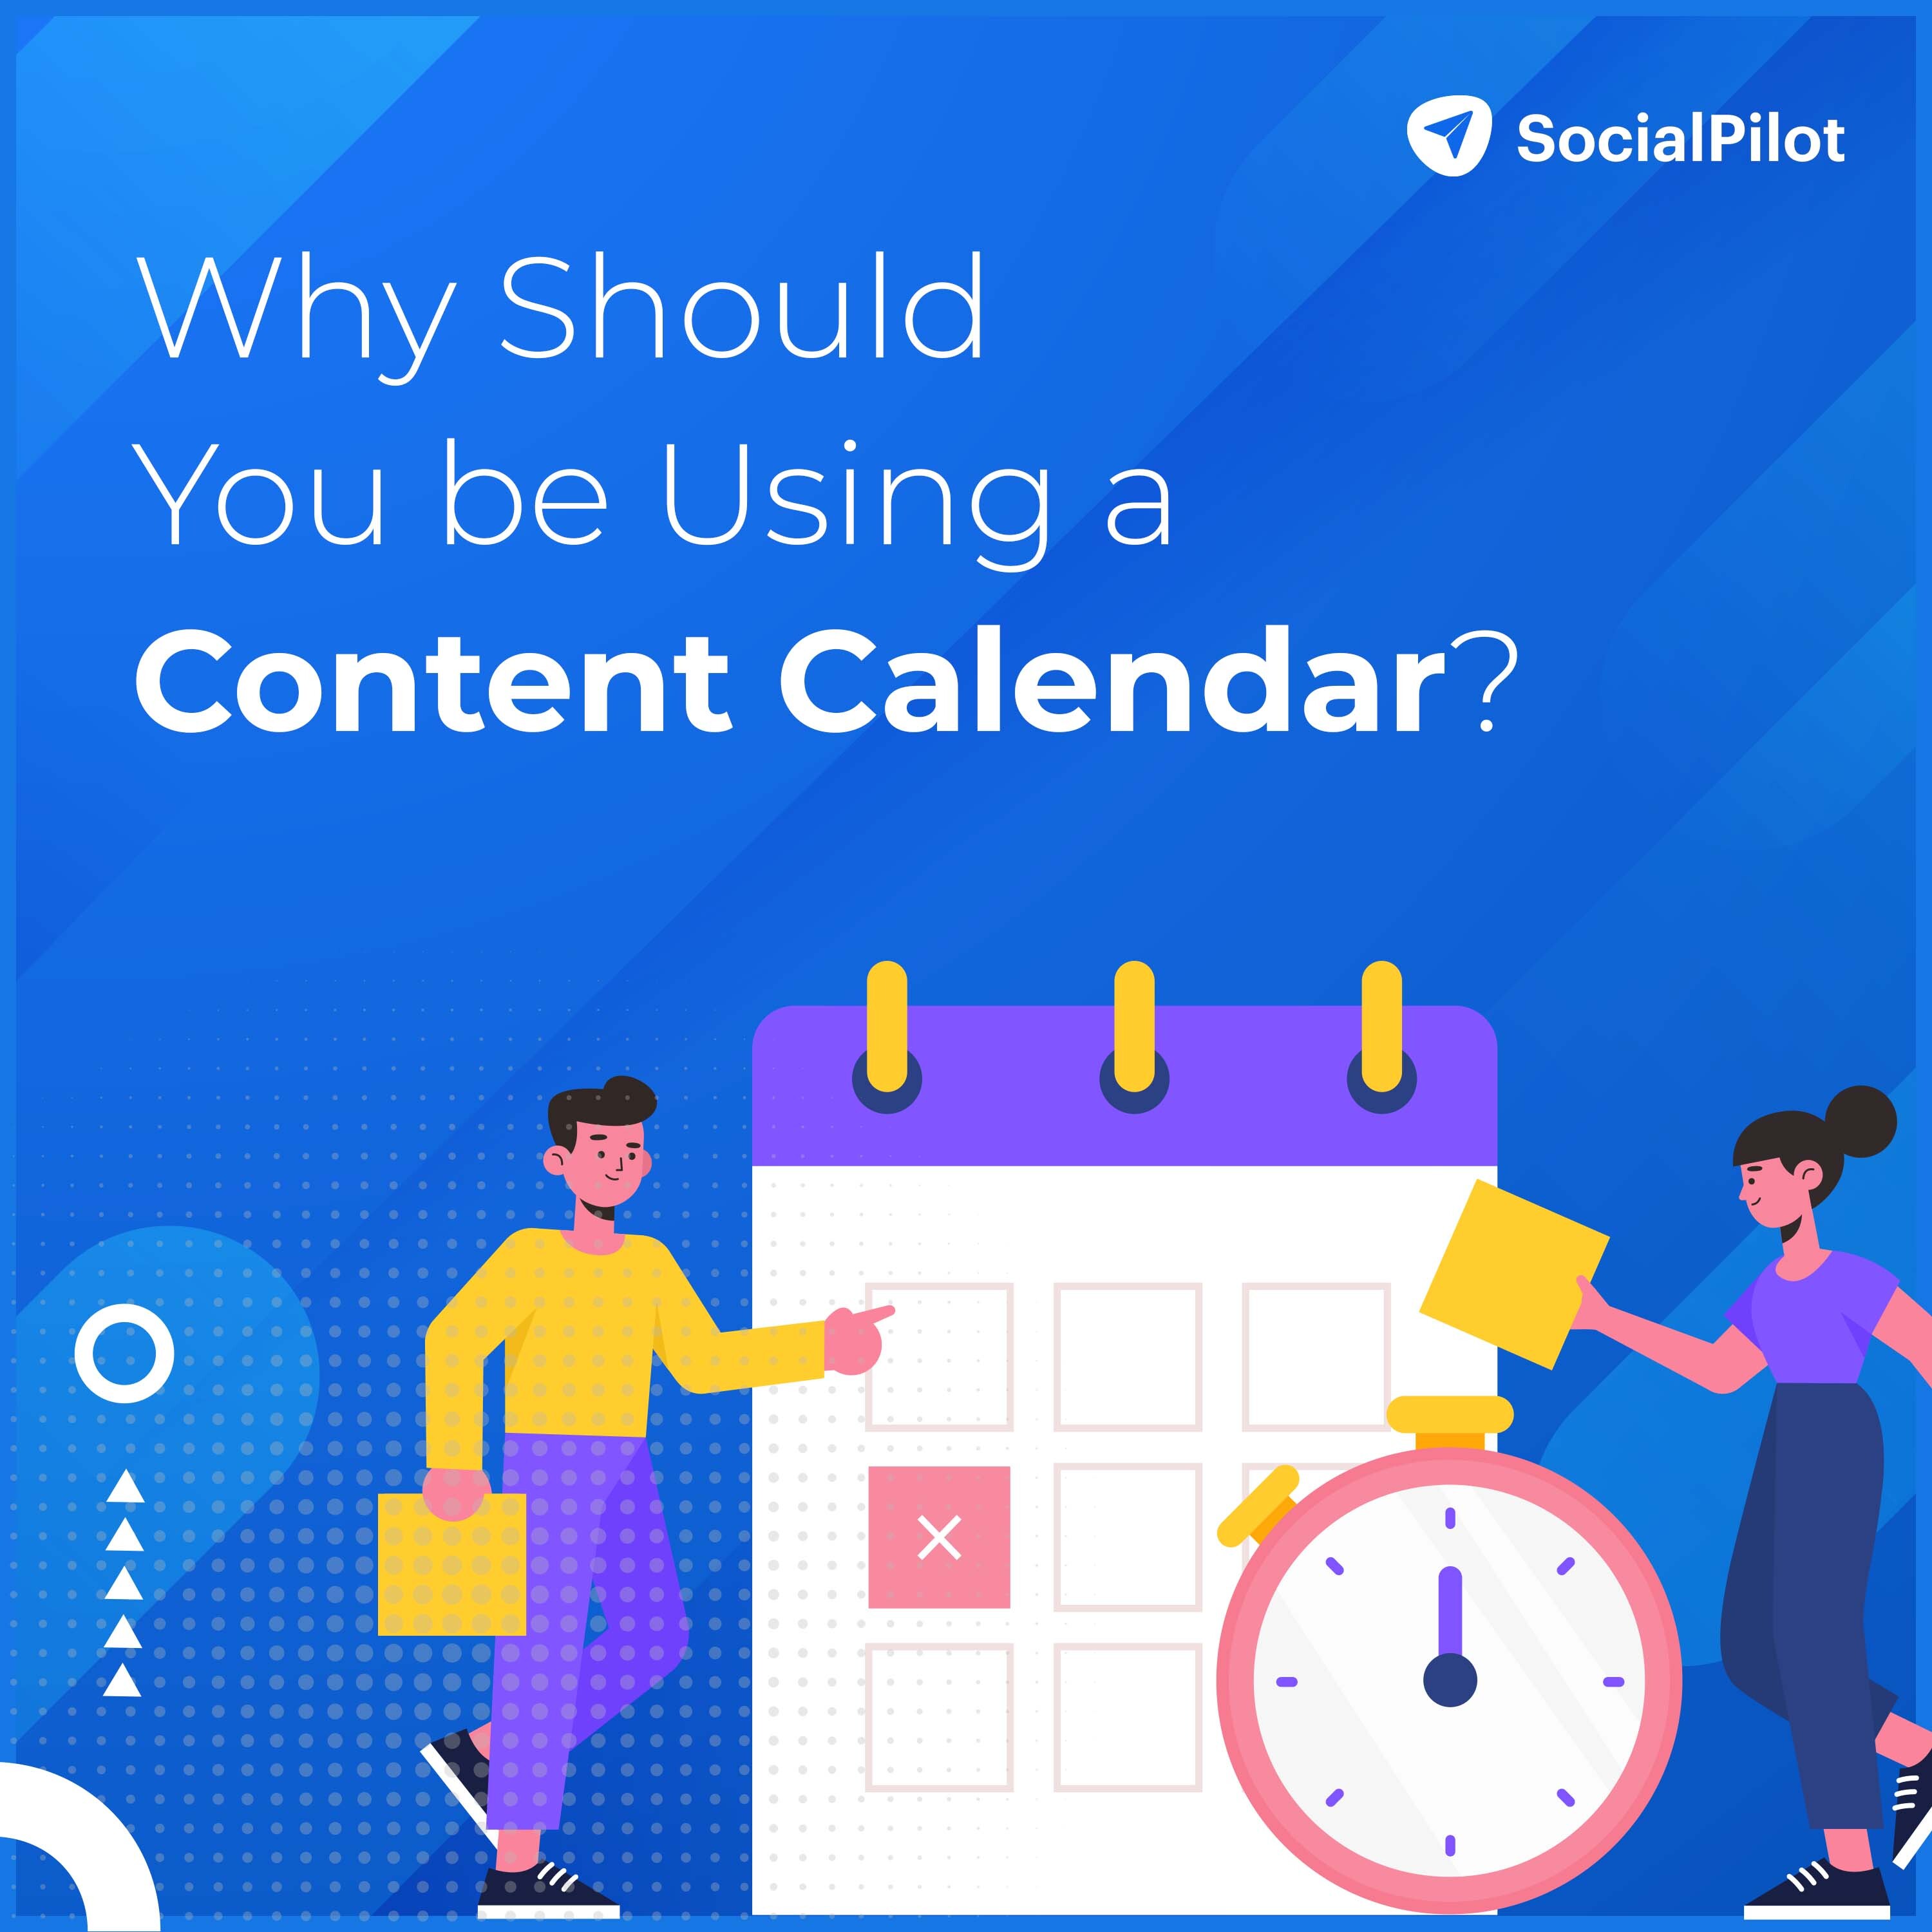 Why Should You be Using a Content Calendar?